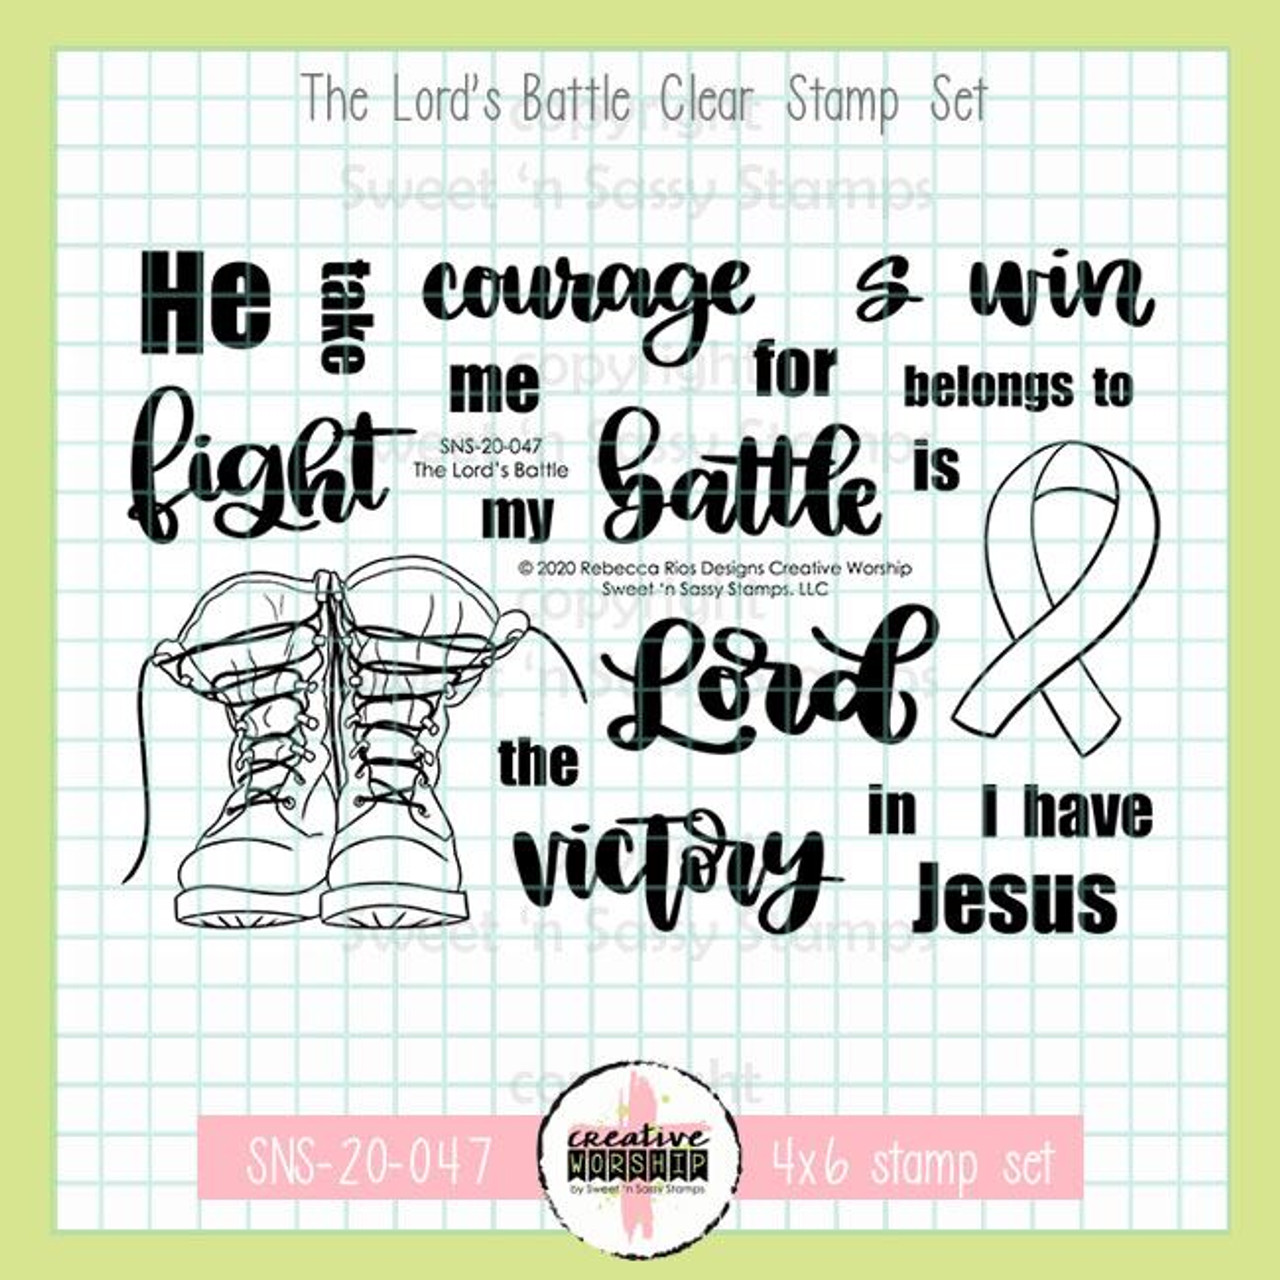 The Lord's Battle Stamp Set